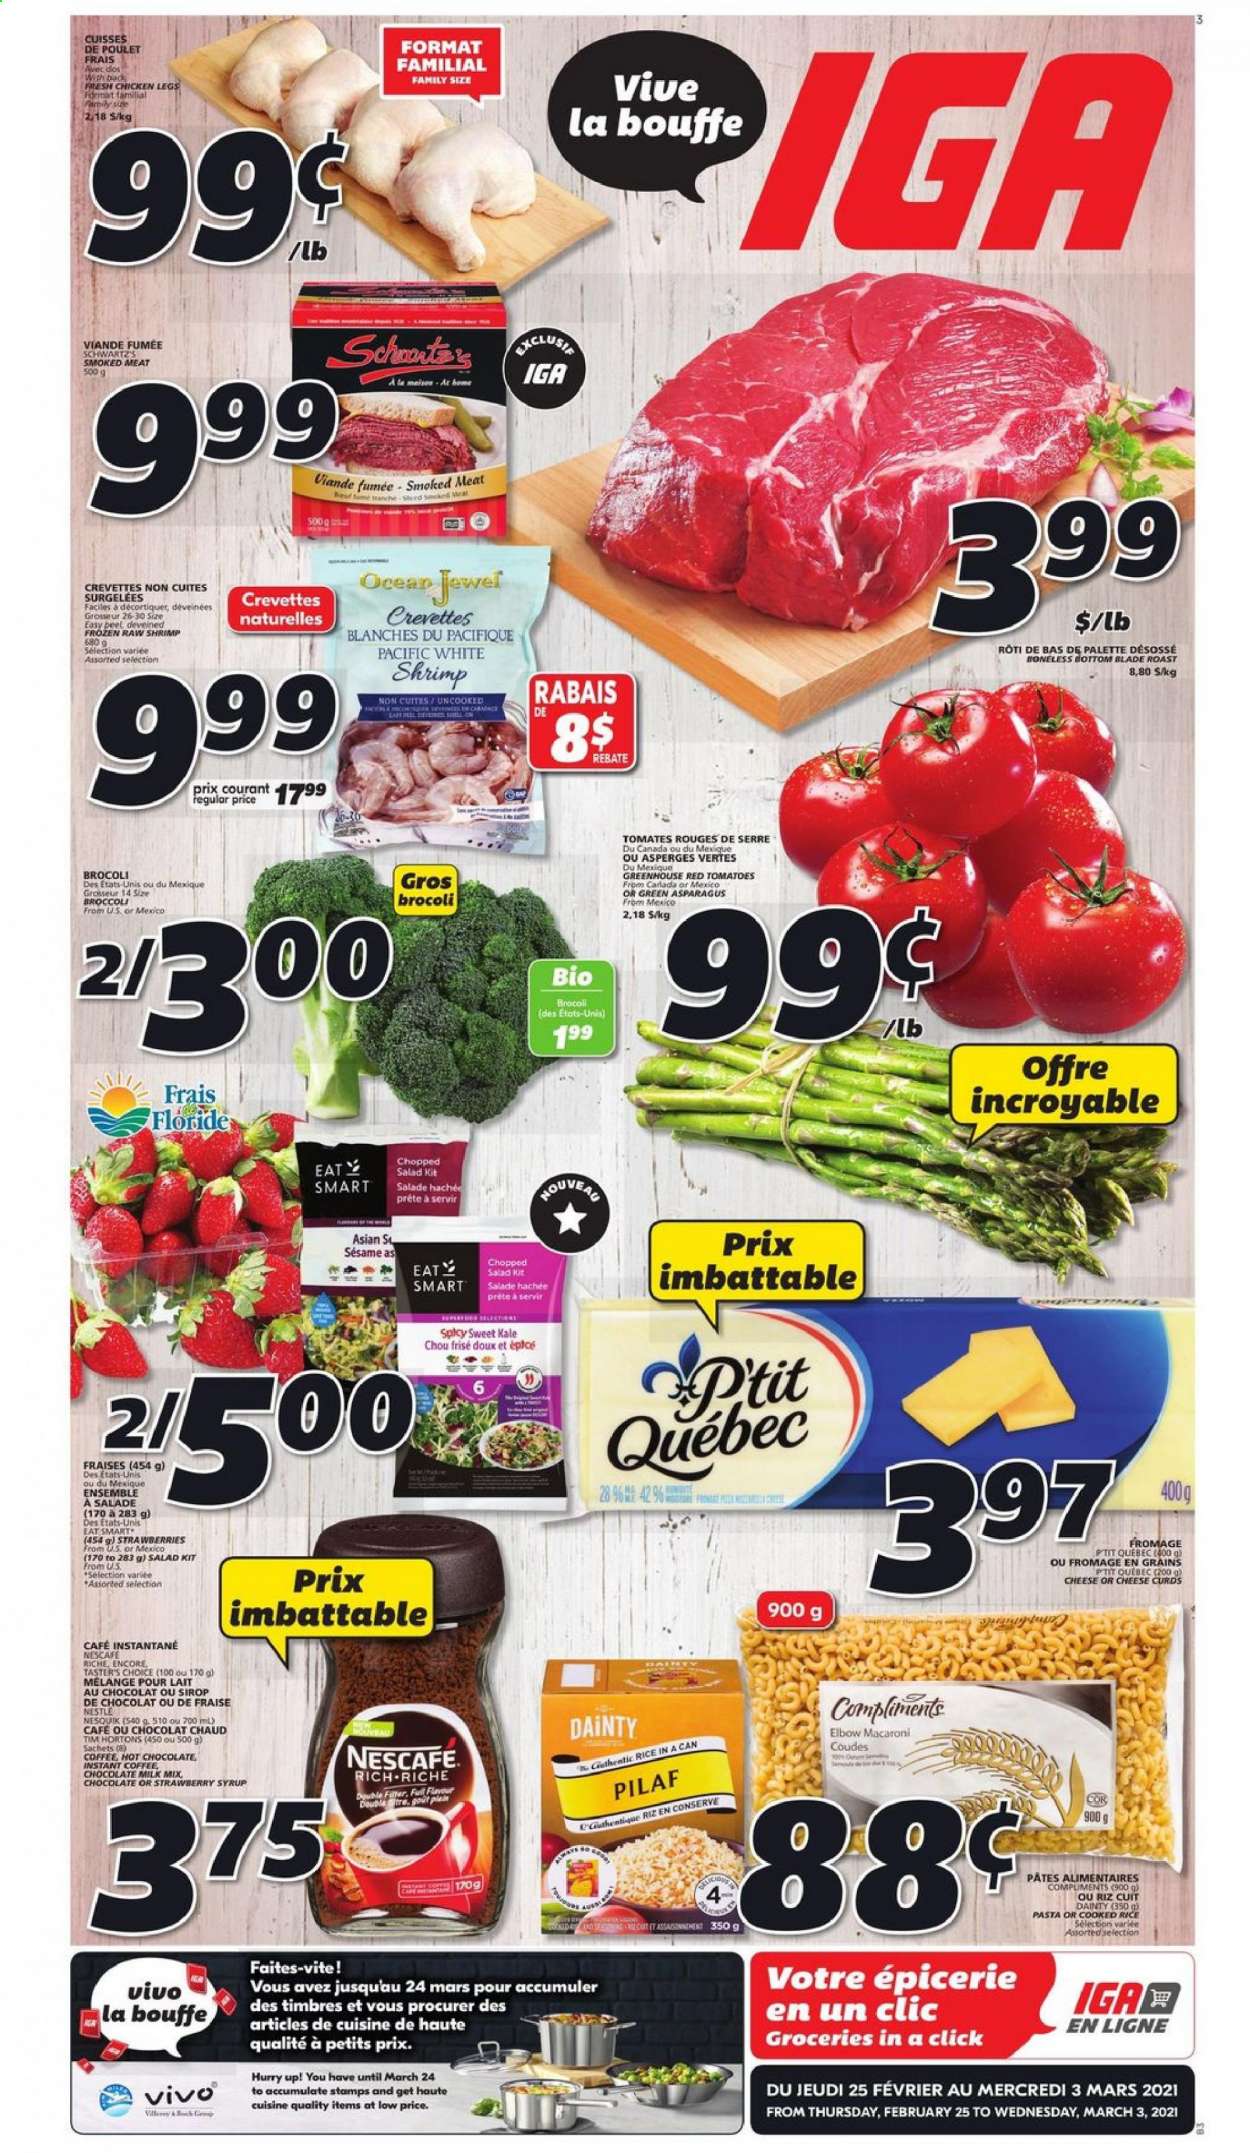 thumbnail - IGA Flyer - February 25, 2021 - March 03, 2021 - Sales products - asparagus, broccoli, tomatoes, kale, salad, chopped salad, shrimps, macaroni, cheese curd, milk, milk chocolate, Mars, rice, syrup, hot chocolate, instant coffee, chicken legs, chicken, Nesquik, Nestlé, Nescafé. Page 1.